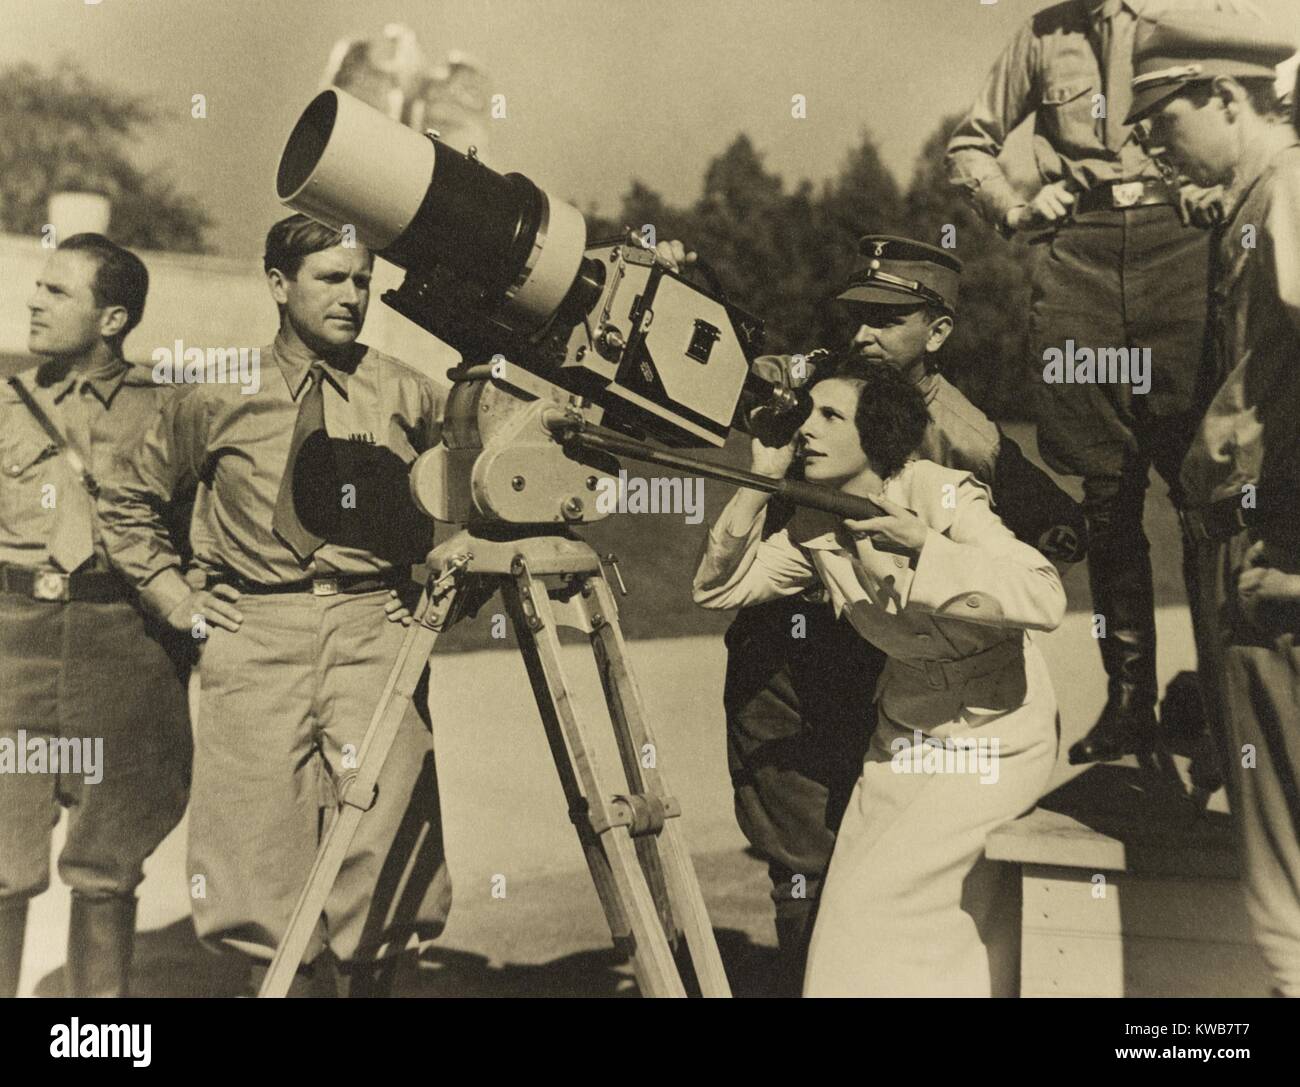 Leni Riefenstahl looking through a large camera with Cinematographer Sepp Allgeier. They are filming 'Triumph of the Will' during the 1934 Nazi Party Congress in Nuremberg, Sept. 5-8, 1934. (BSLOC 2014 8 176) Stock Photo